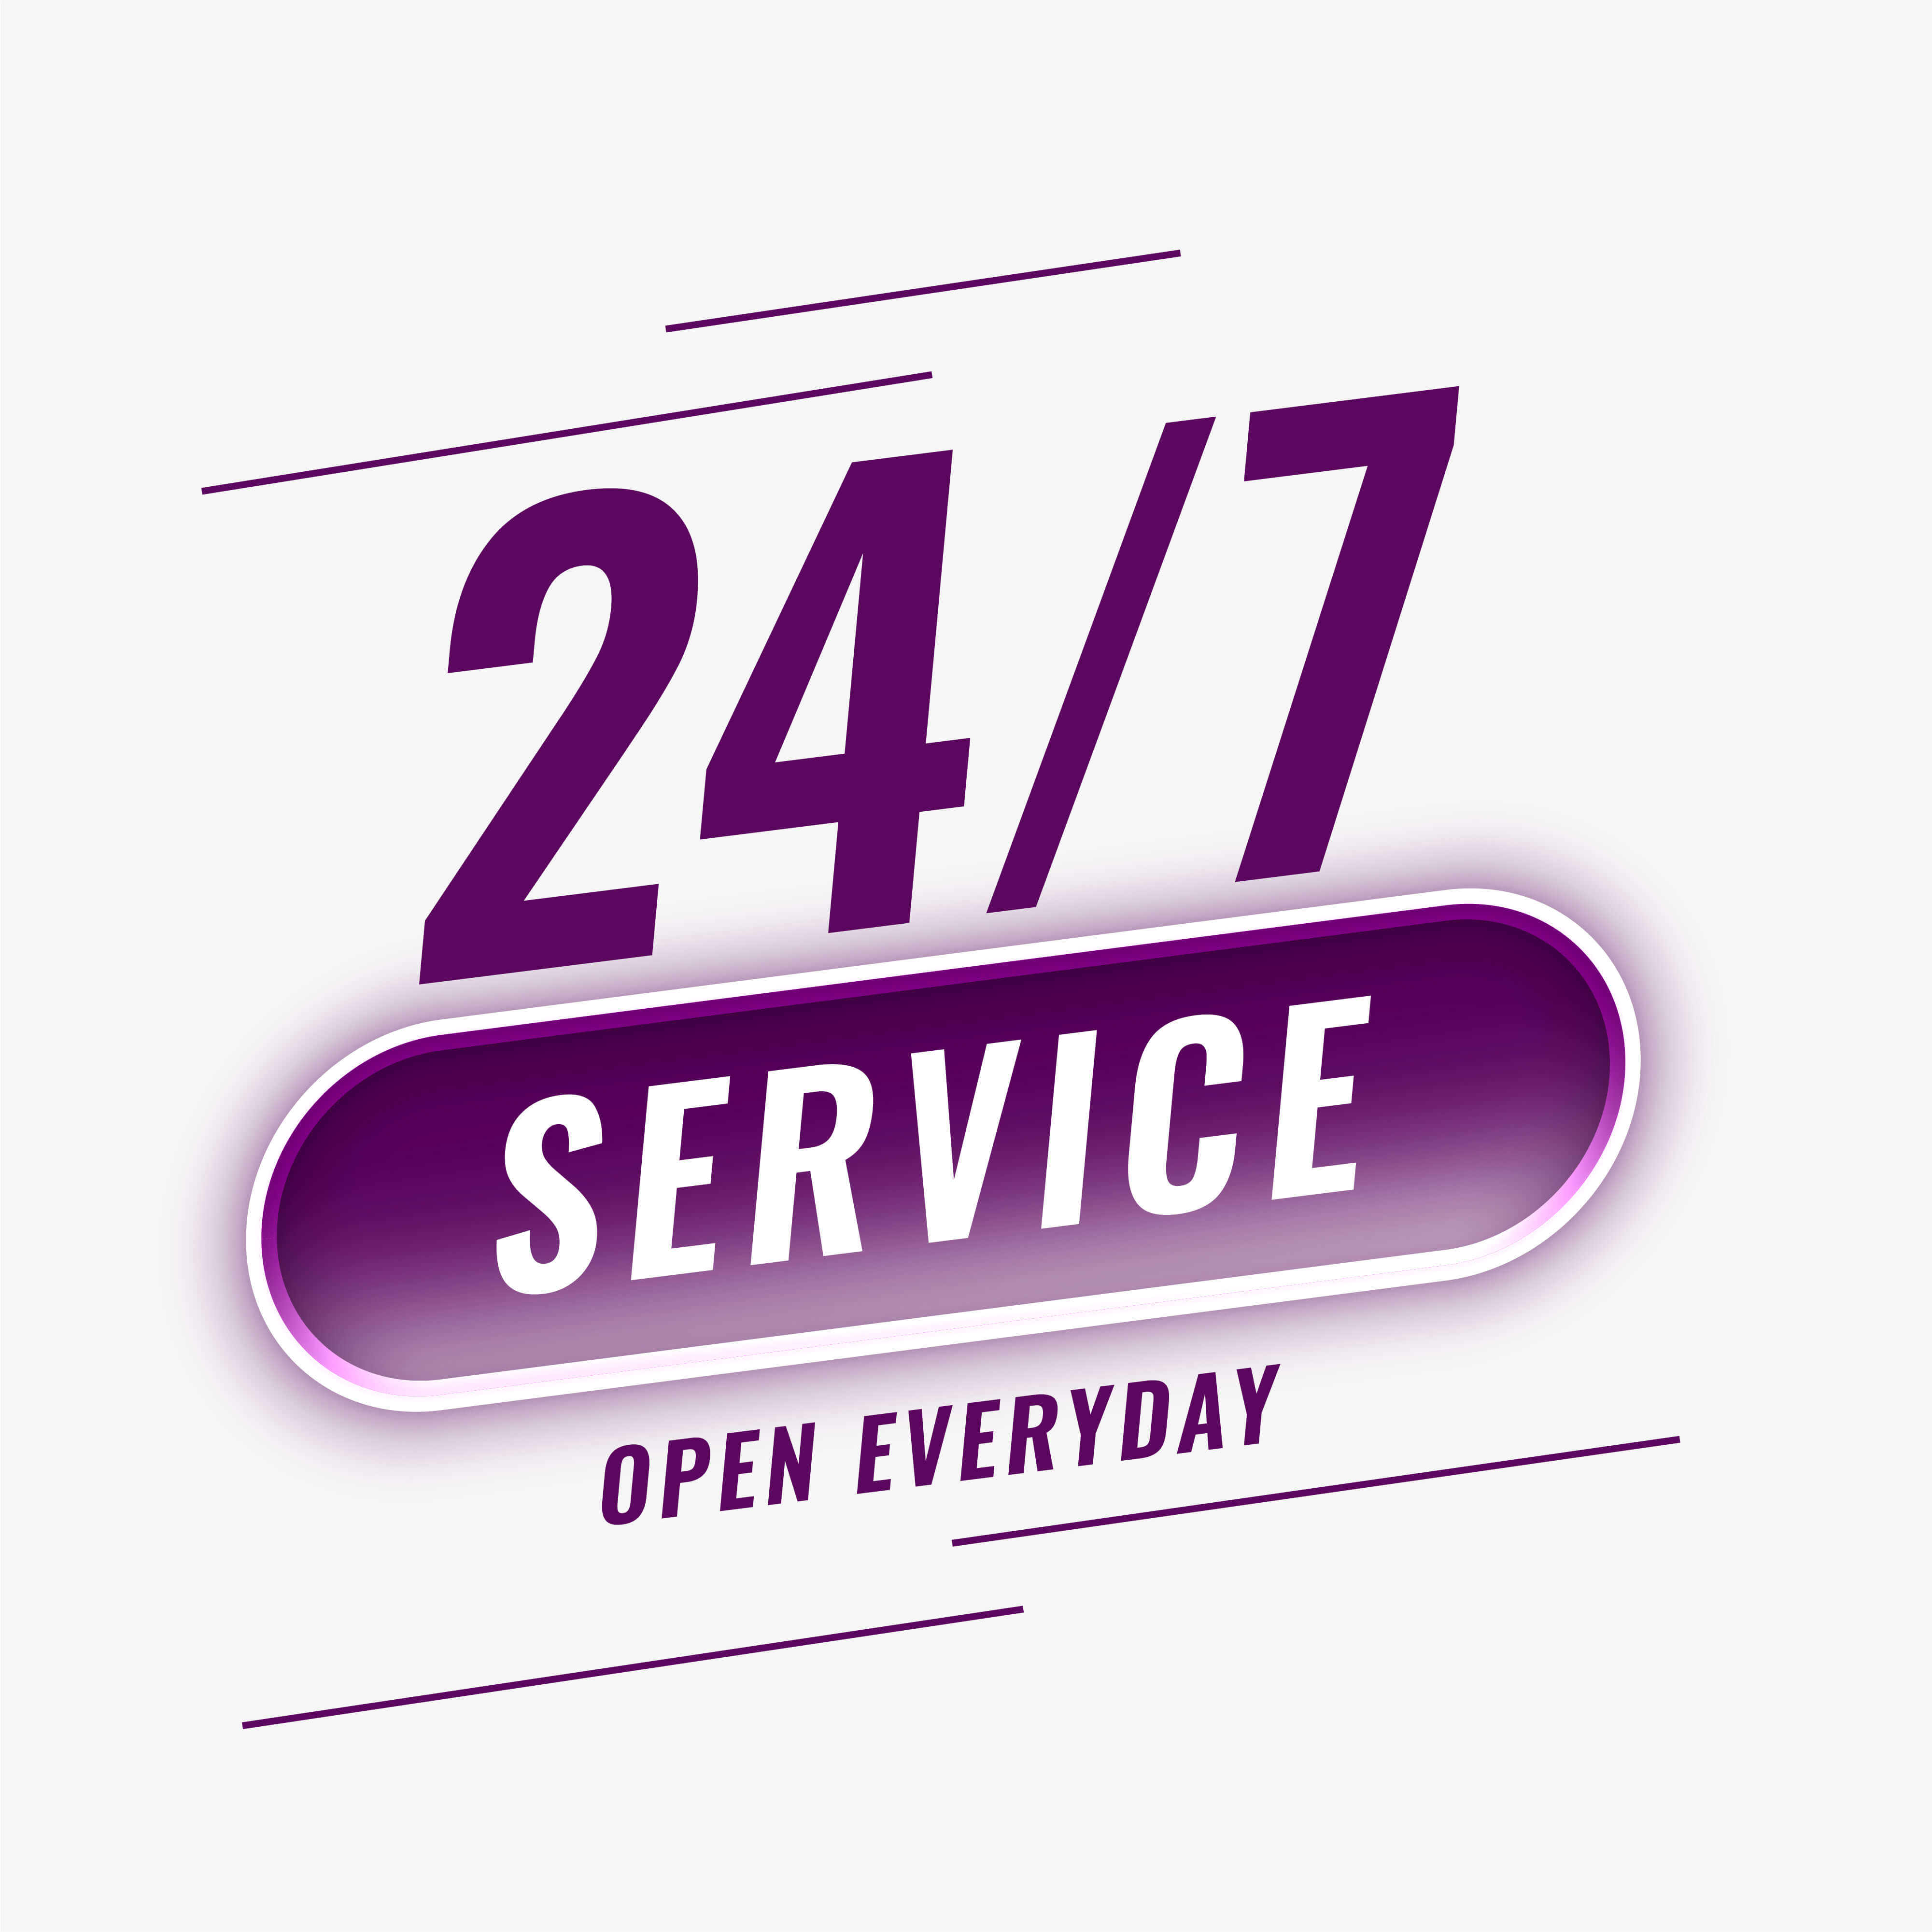 24 hours services Taxi Hotel novotel Taxi la reserve Taxi odalys